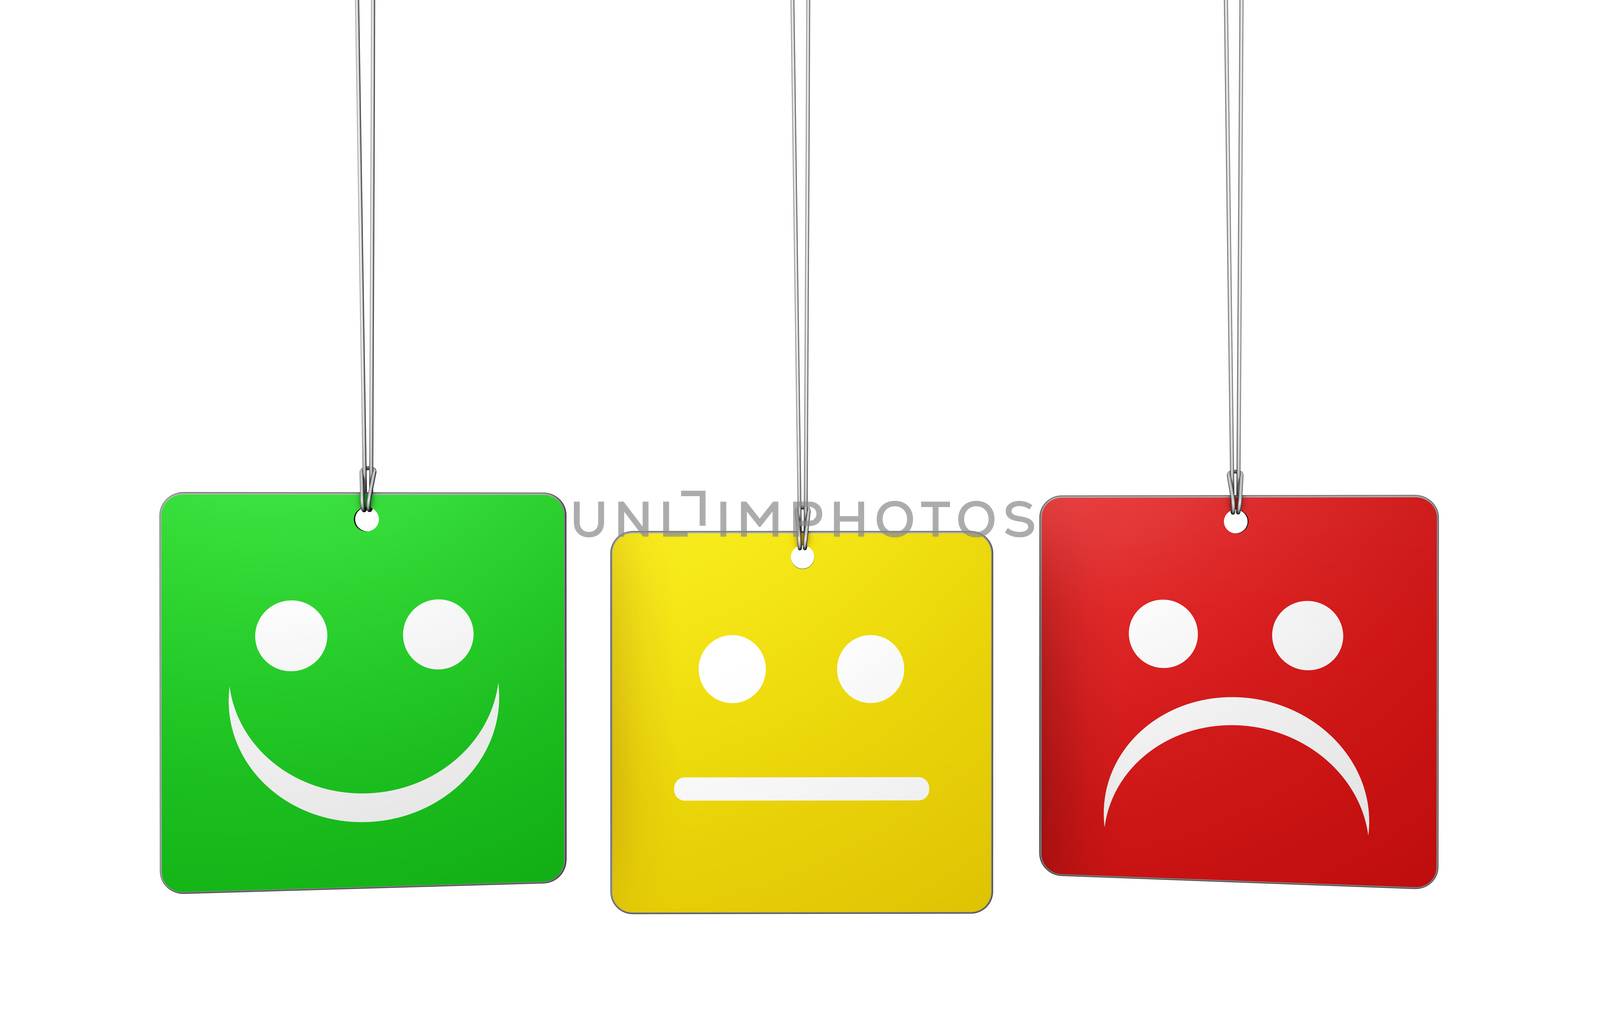 Customer service and product quality feedback concept with three emoticon icons and symbol on hanged tags isolated on white background.